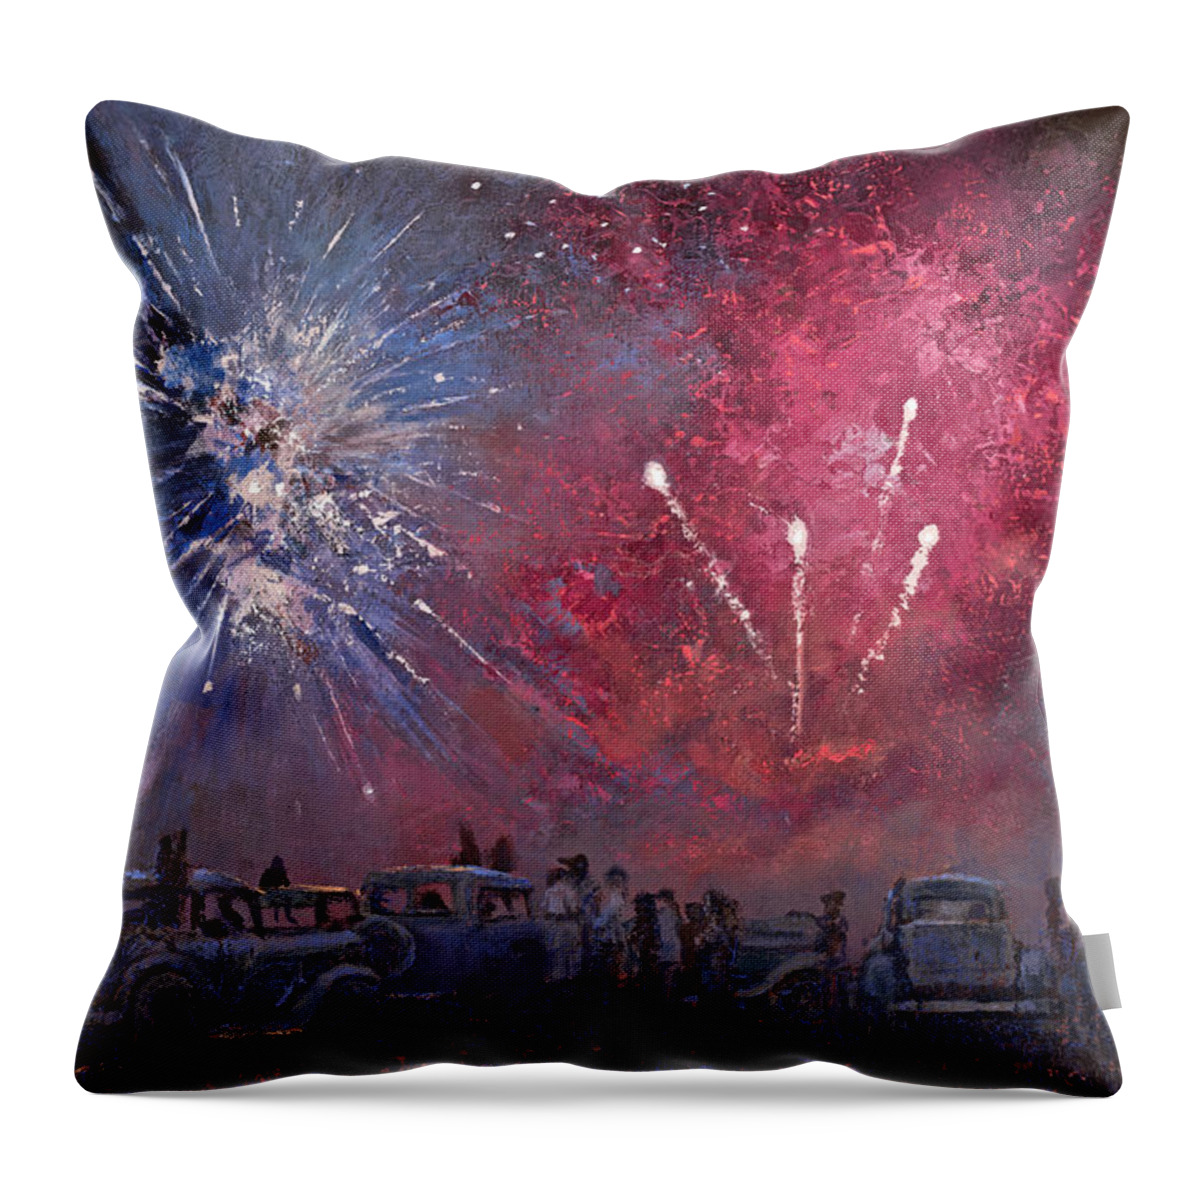 Fireworks Throw Pillow featuring the painting Let Freedom Ring by Mia DeLode